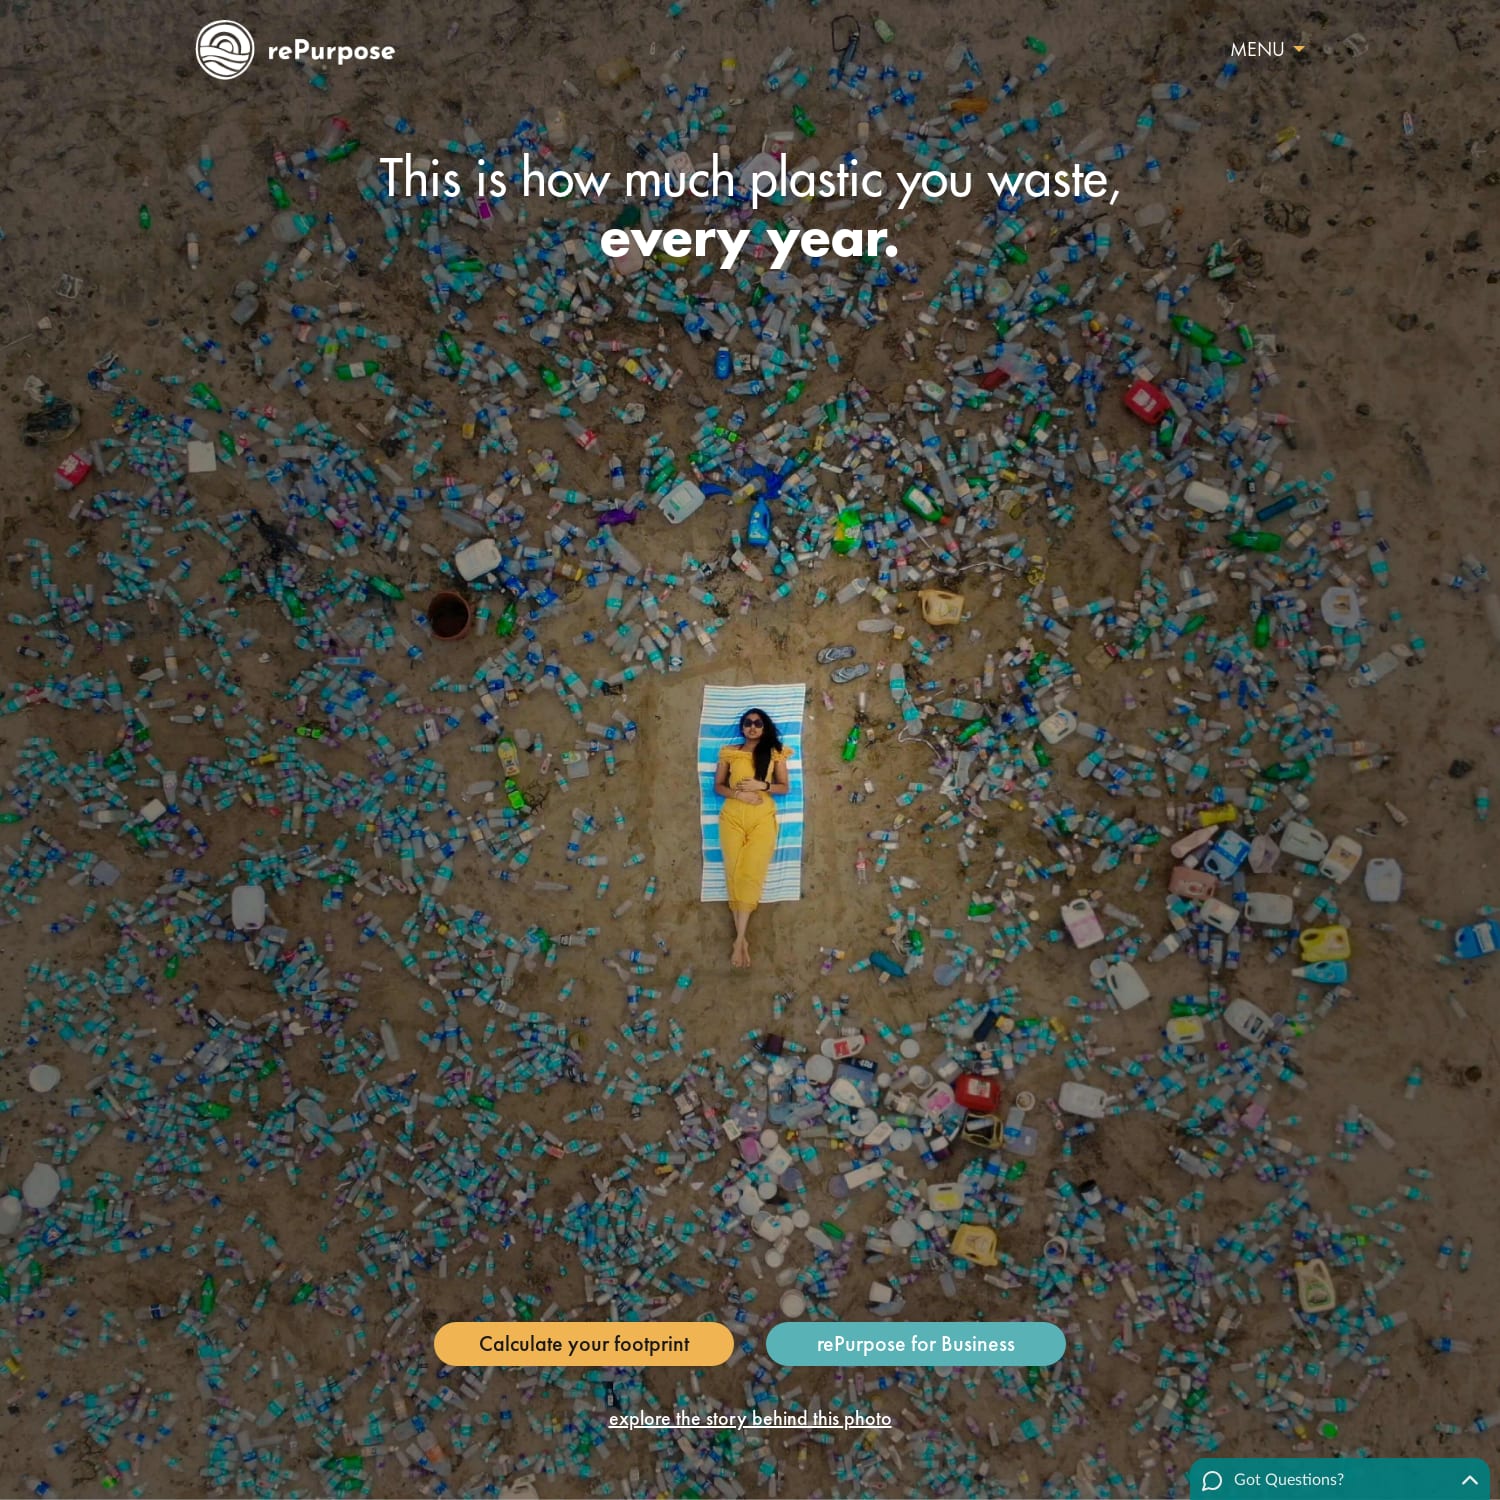 Go PlasticNeutral and reBalance your footprint by supporting waste workers